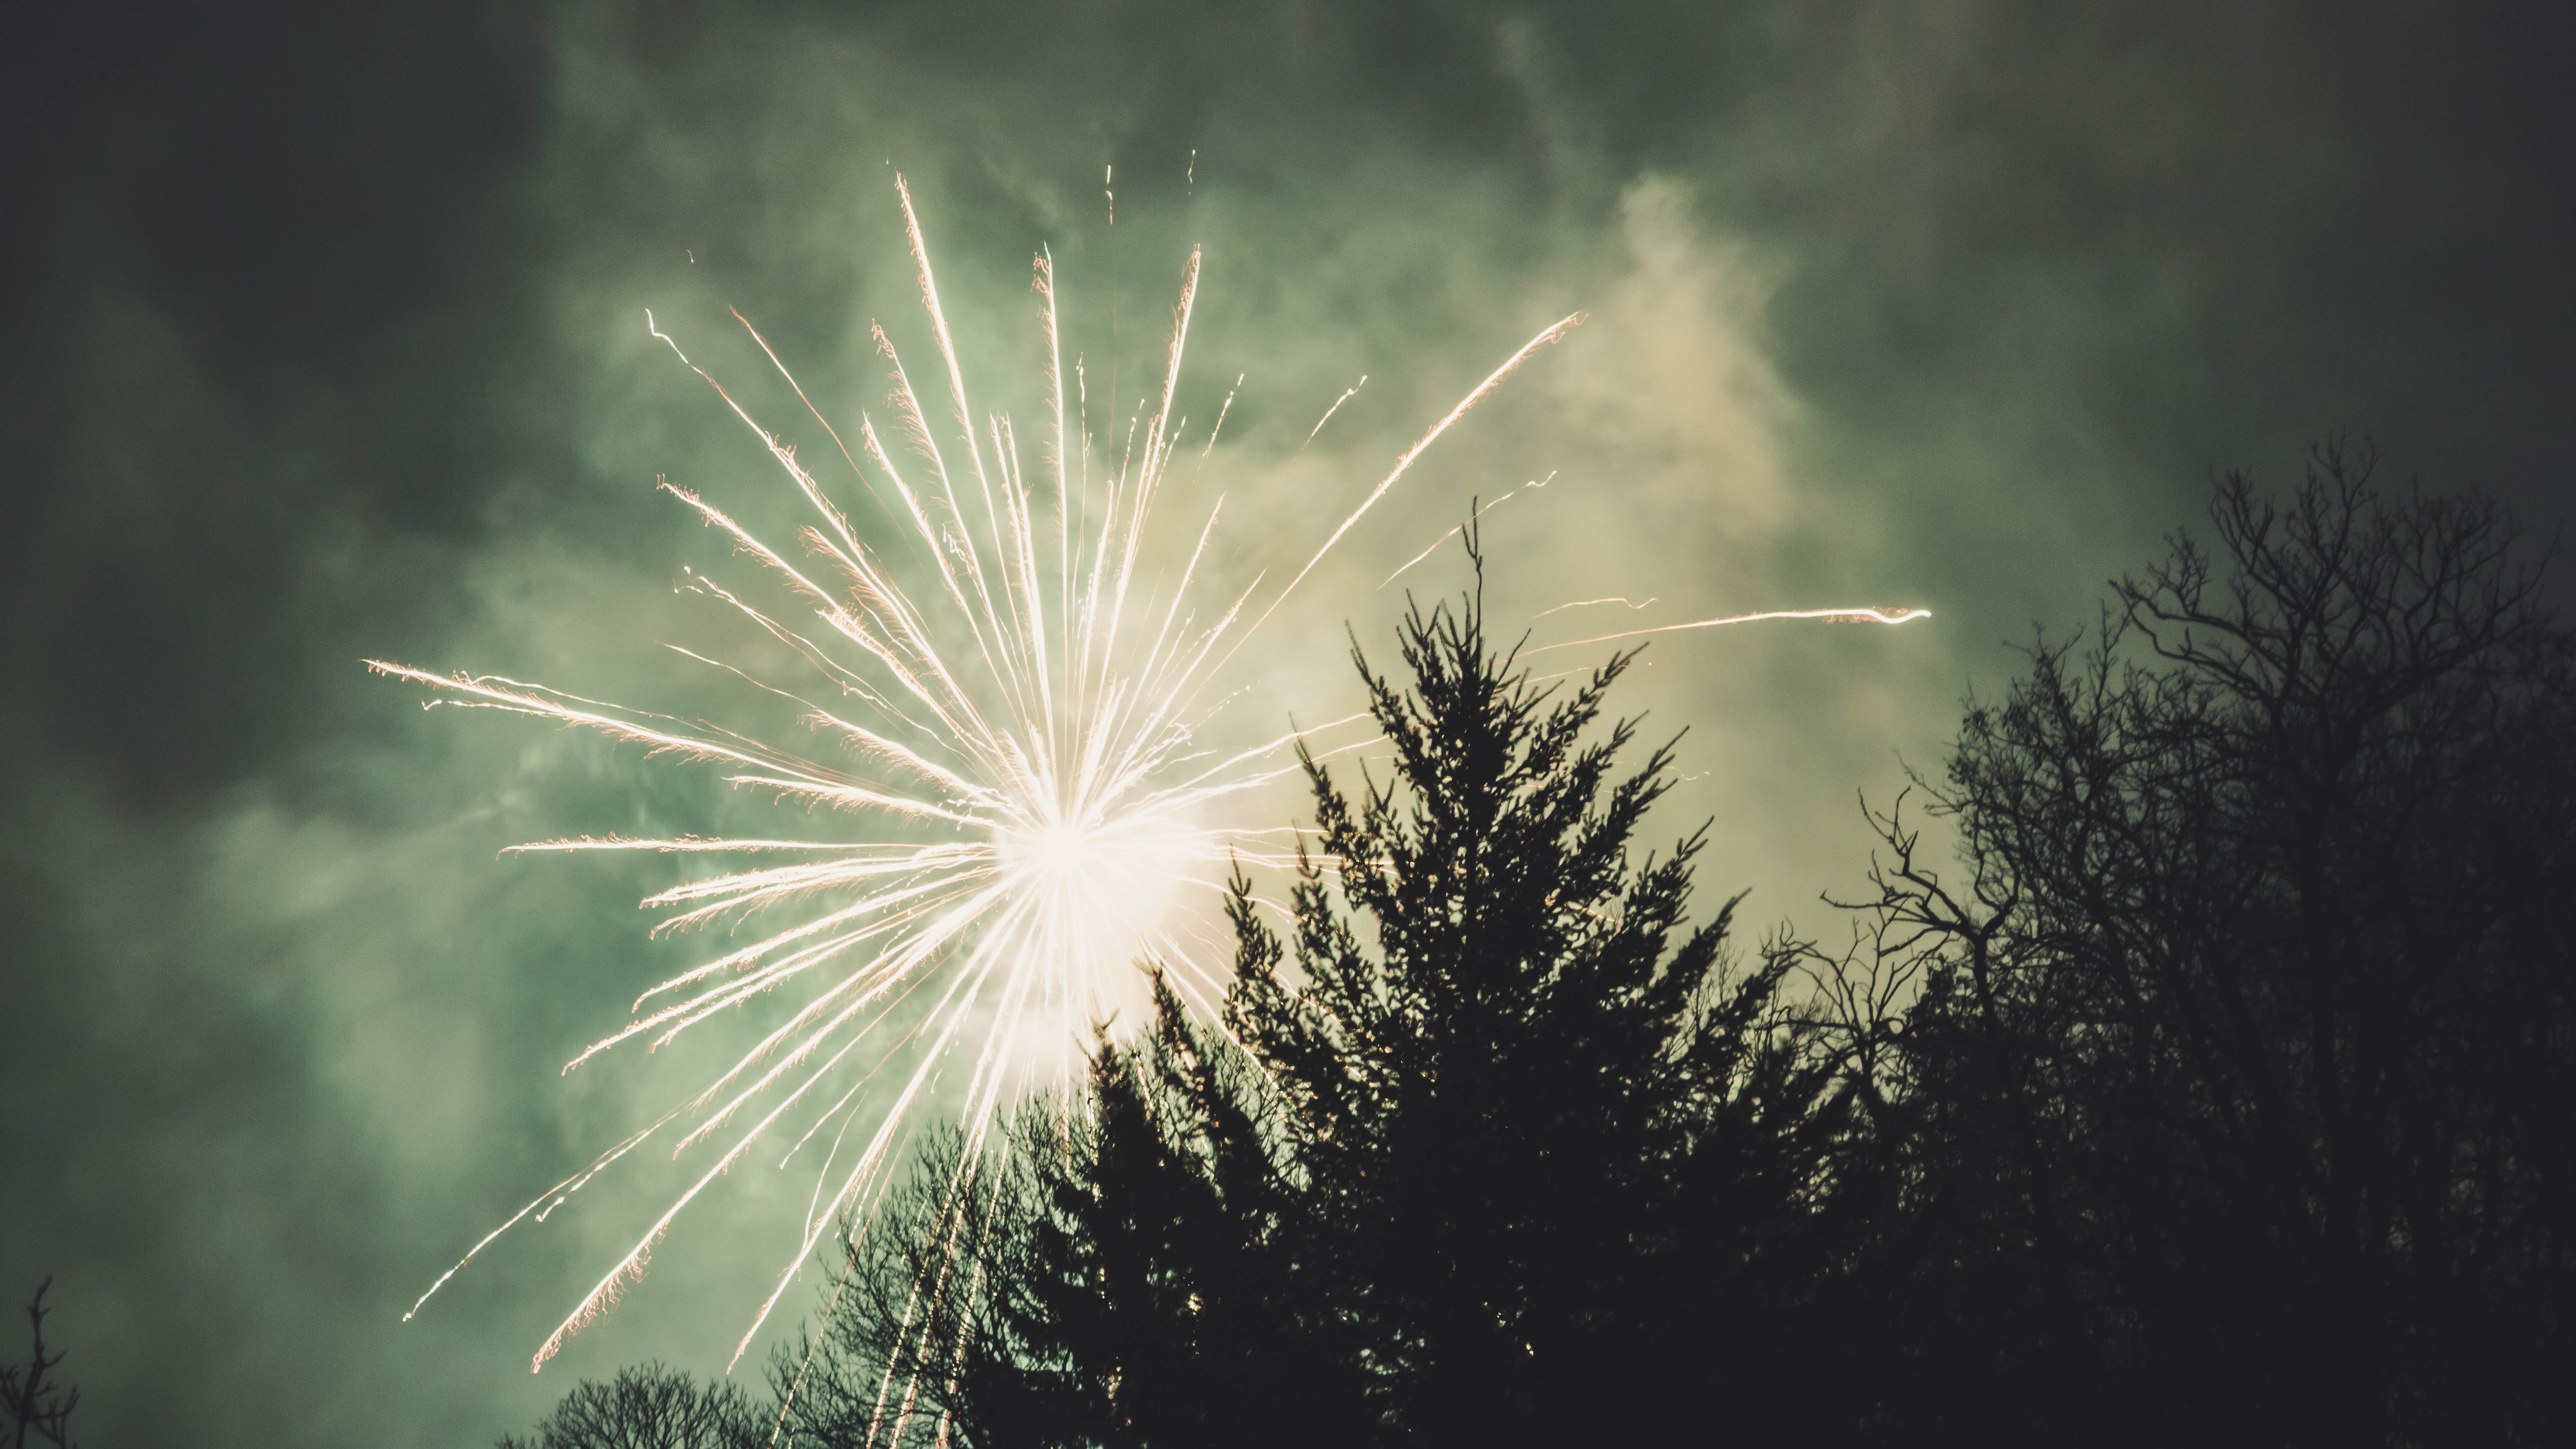 Fireworks display above trees photo